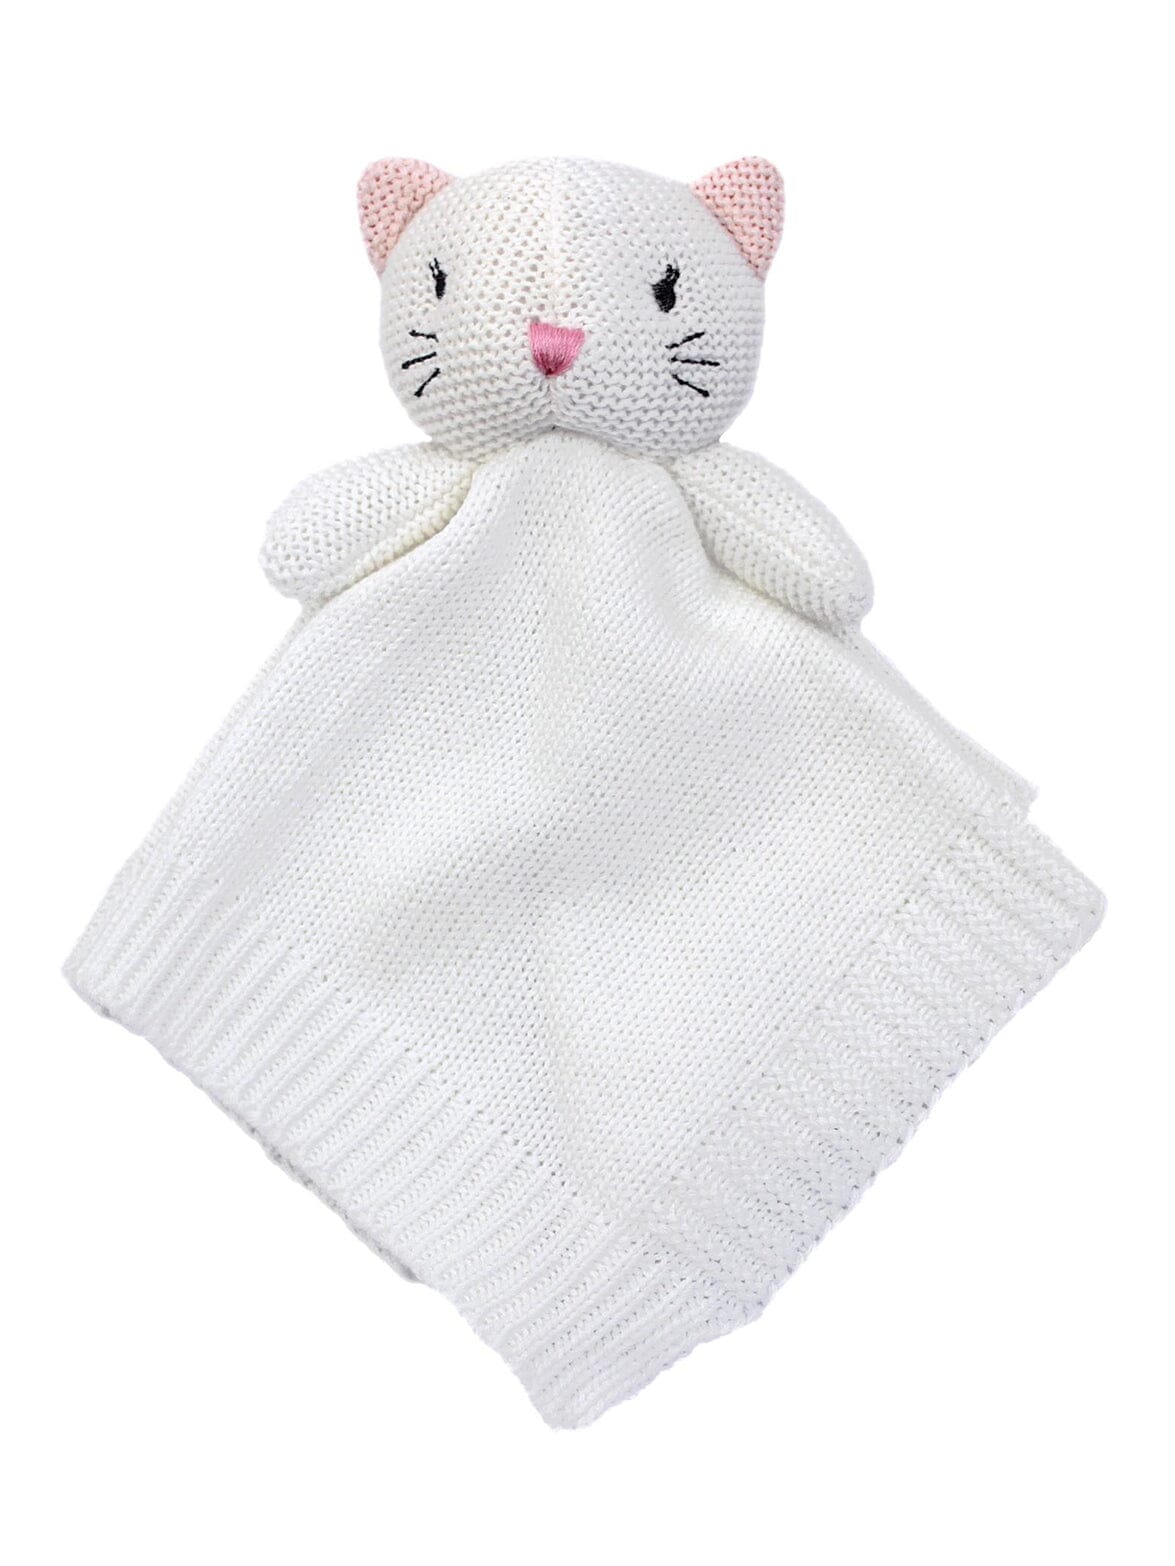 Knitted Comforter - Cat - Comforter - Hugs and Kisses